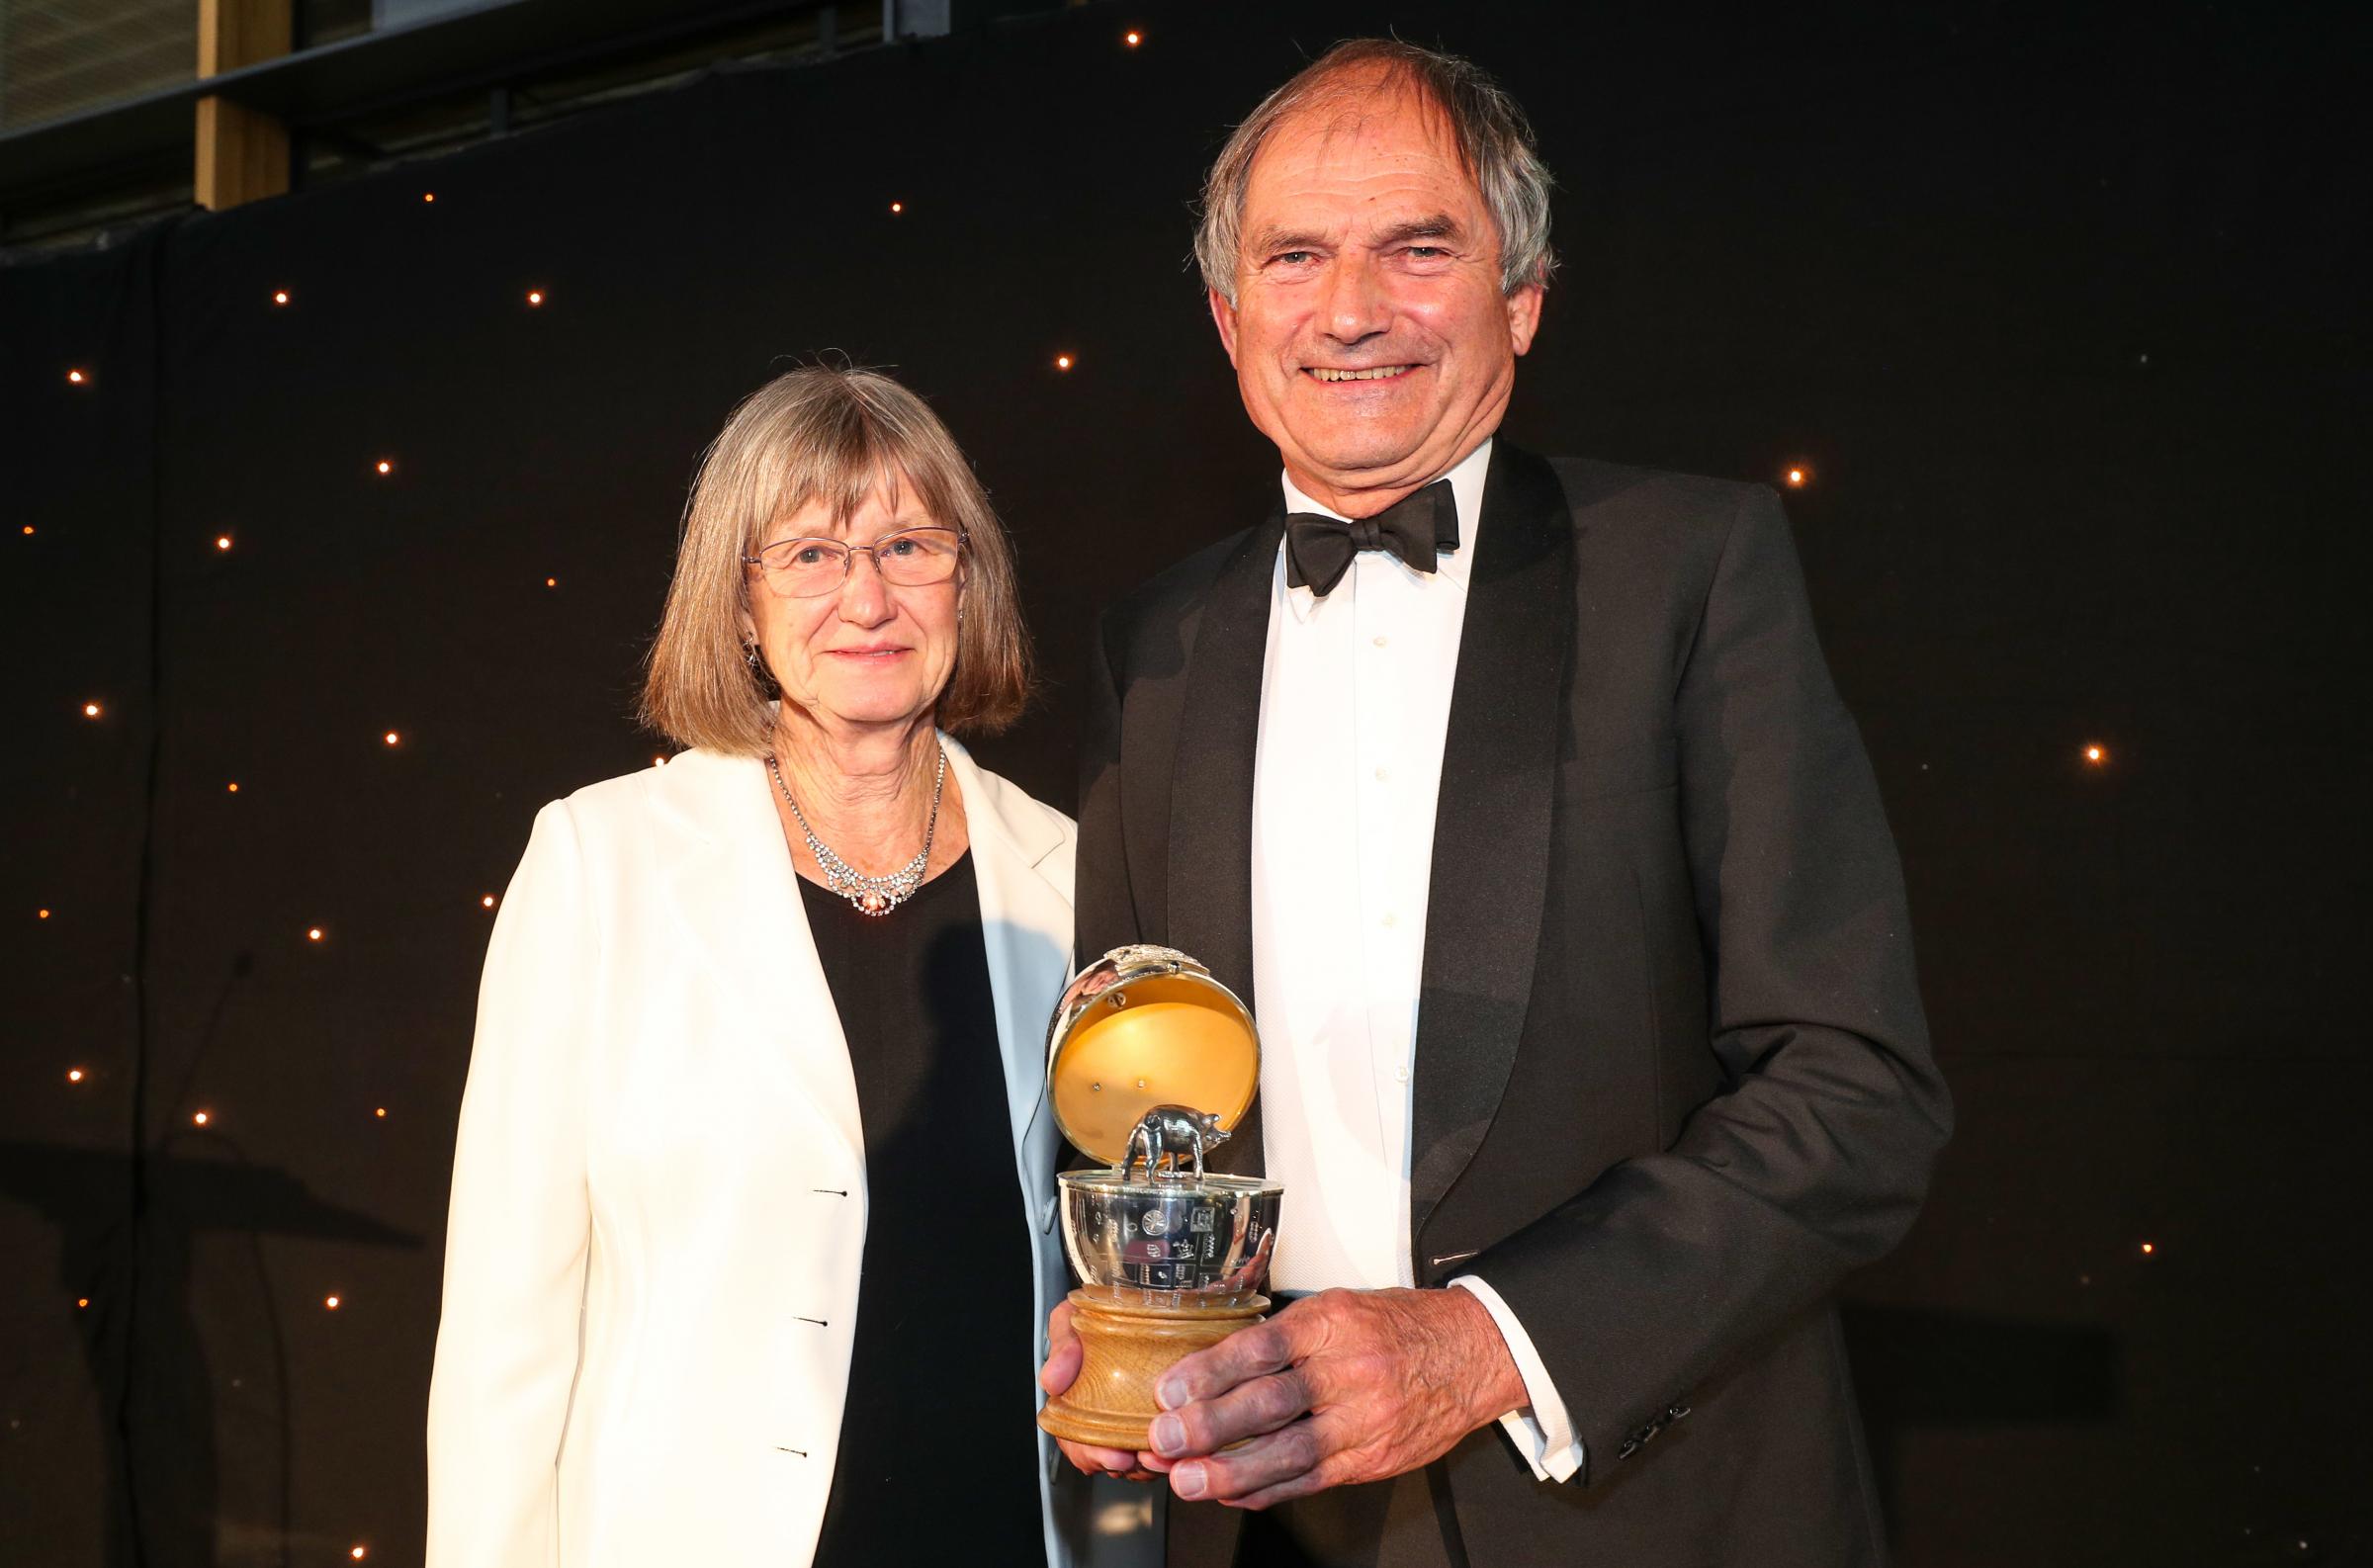 Winchester Business Excellence Awards 2021. Winner of the Millennium egg for 2021 Robert Shields pictured with his wife Ruth.